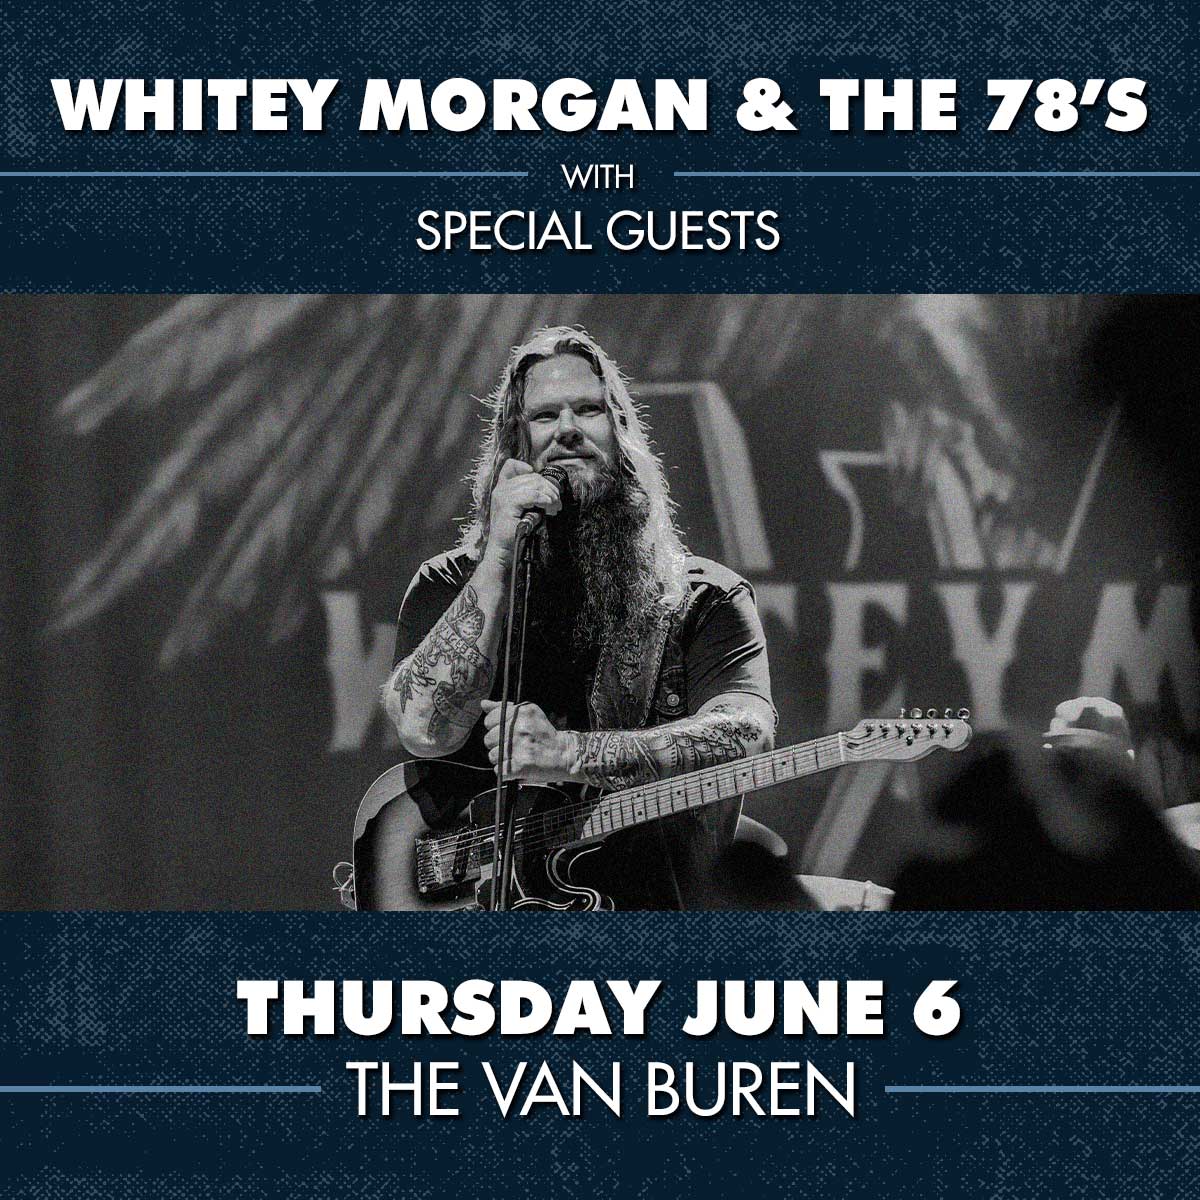 WHITEY MORGAN AND THE 78'S